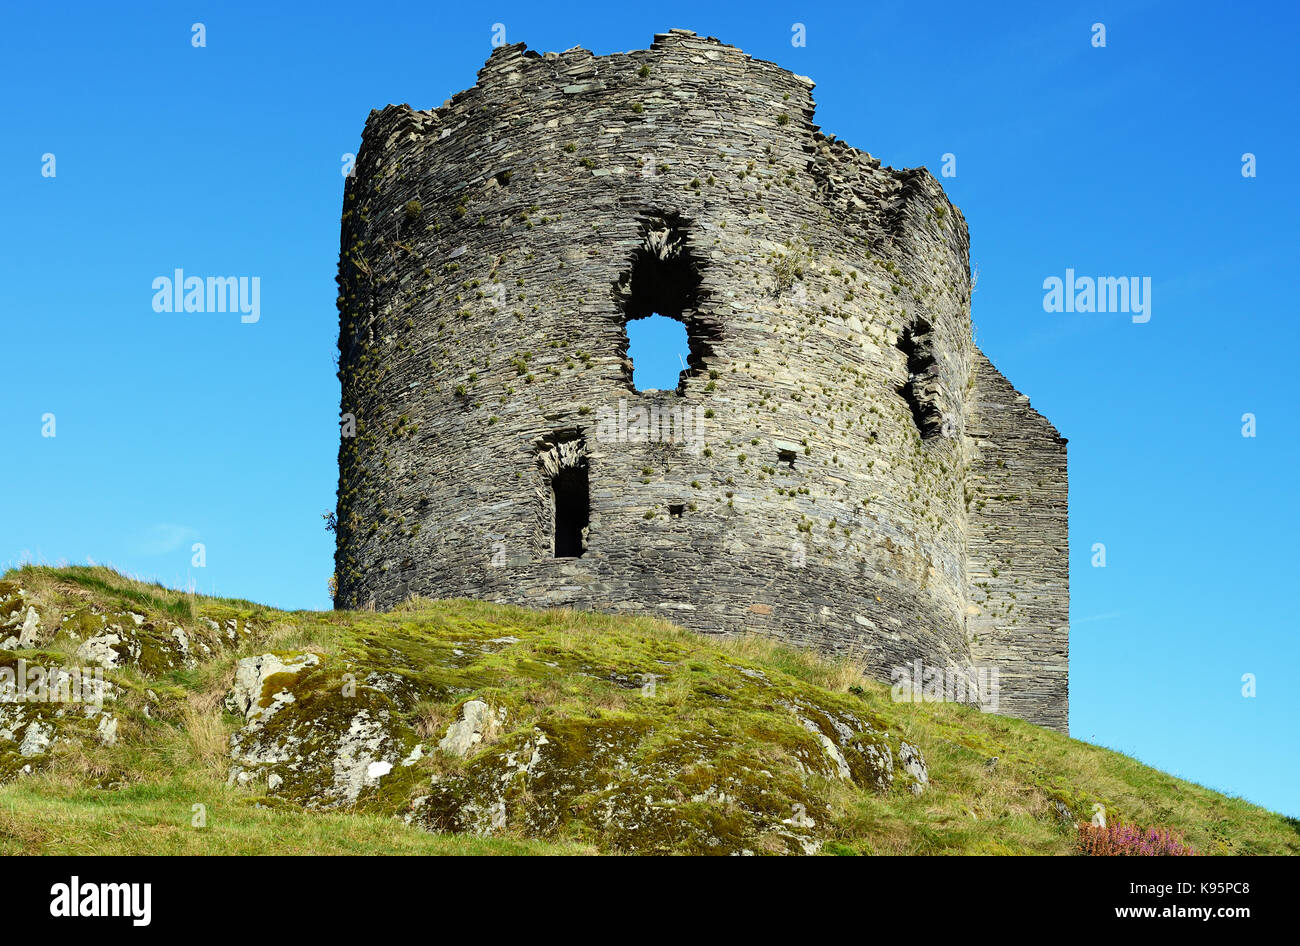 Dolbadarn Castle, close to Llanberis in North Wales, was built in the early 13th century by the Welsh Prince known as Llywelyn the Great. Stock Photo